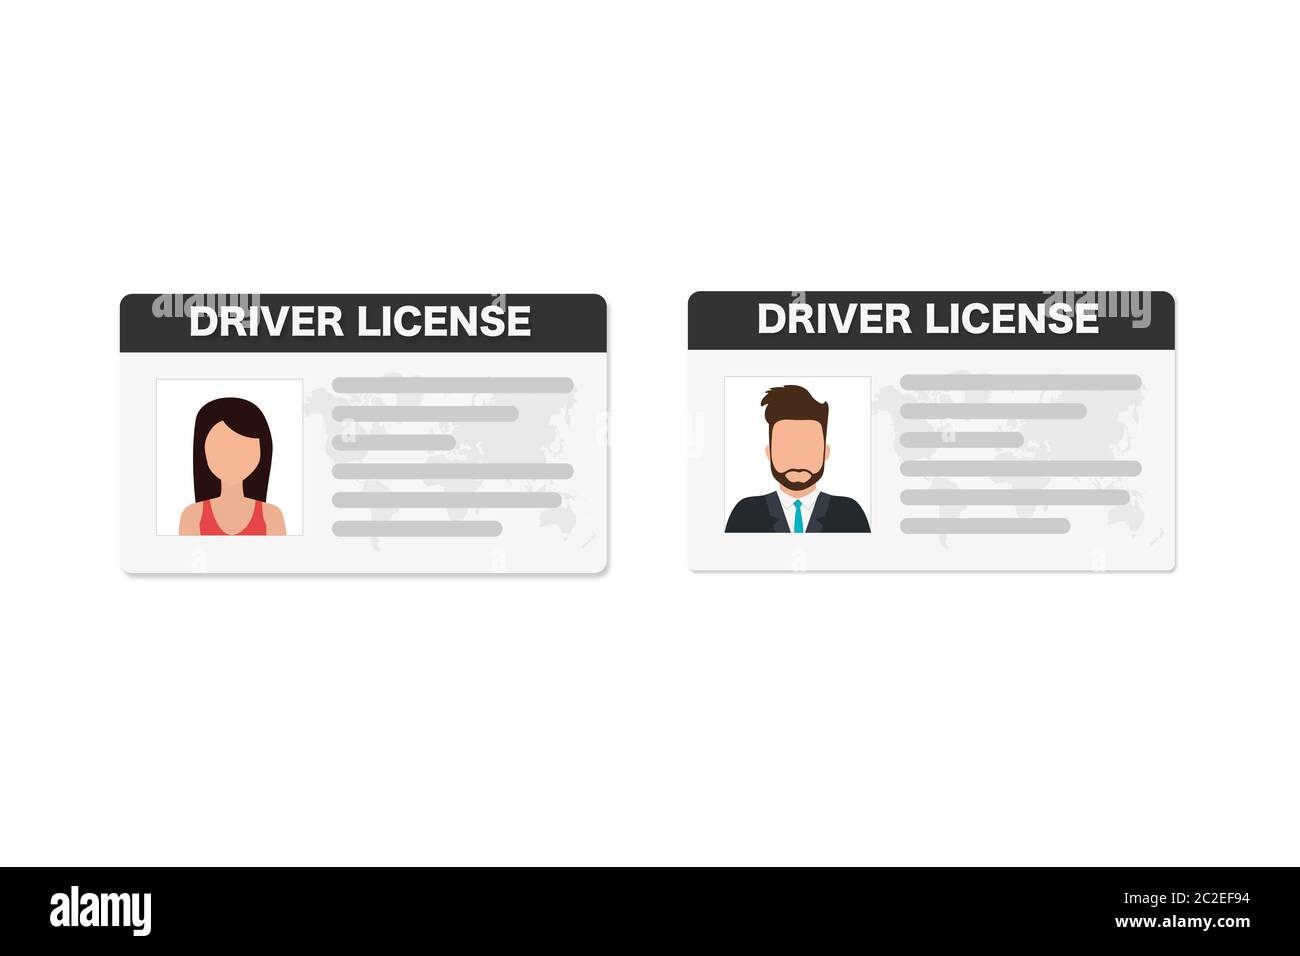 Flat man driver license plastic card template, id card vector illustration Stock Vector